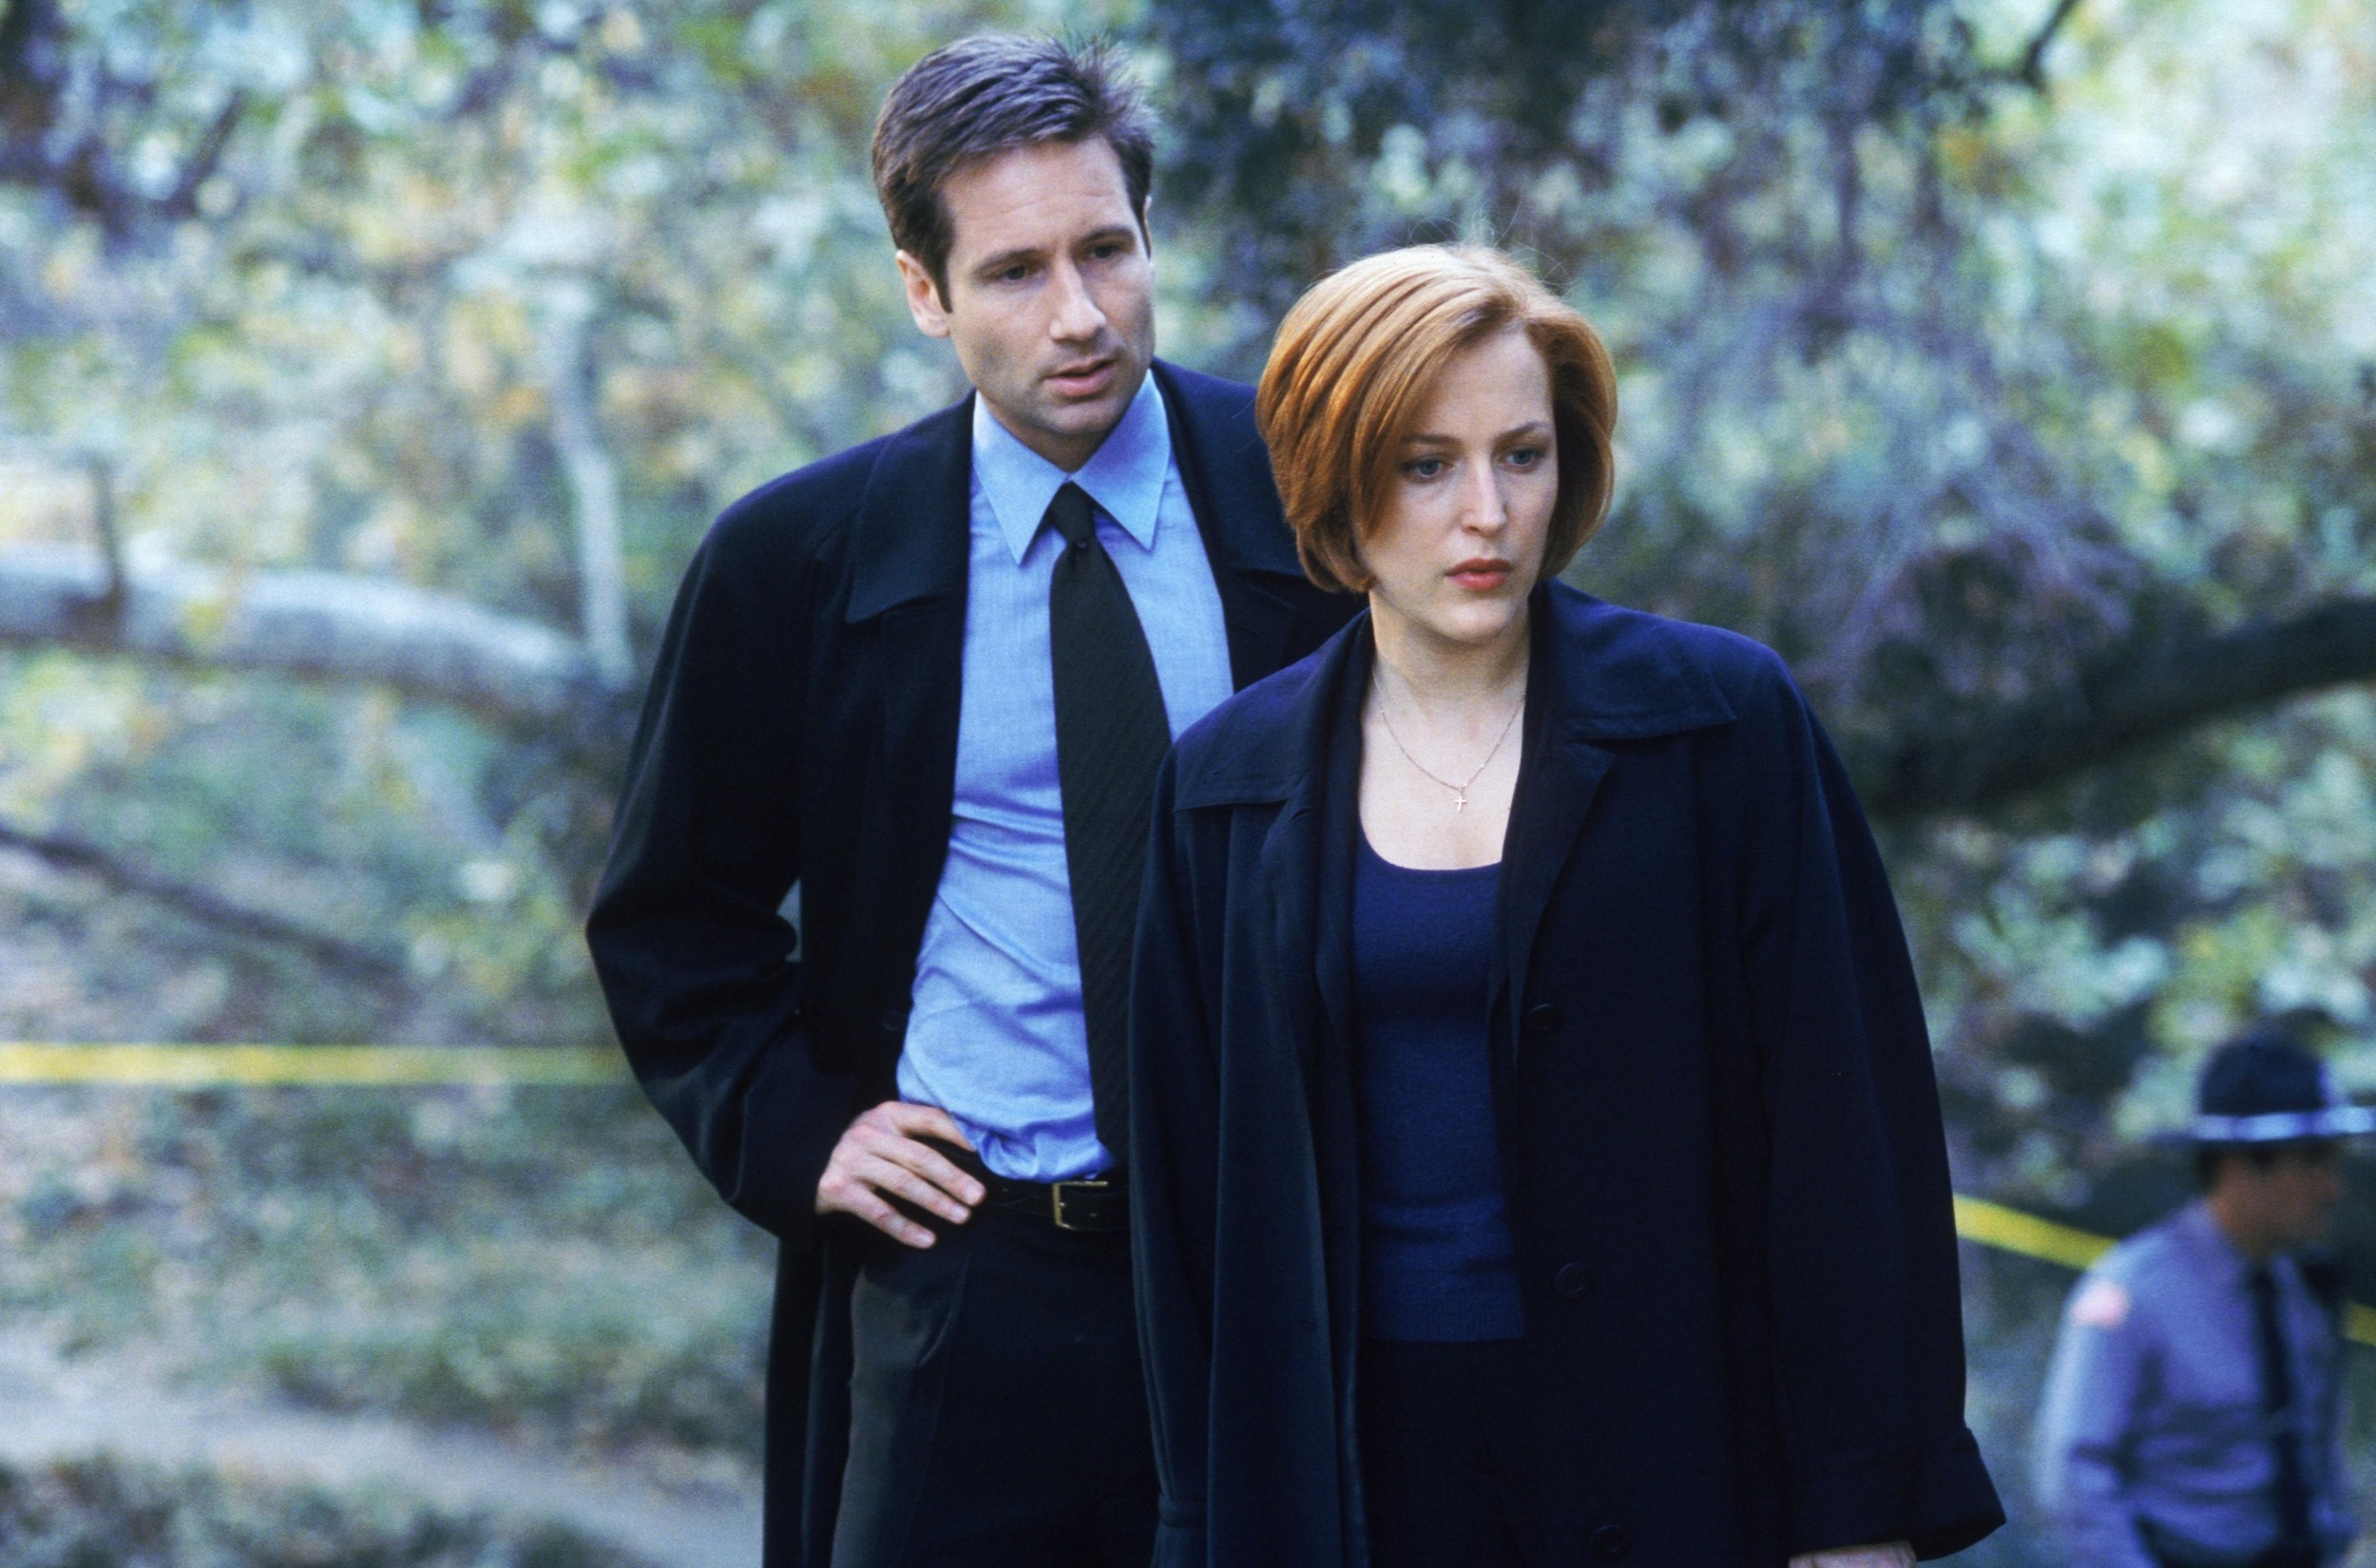 <p>If there’s one show that embodies the 1990s fascination with aliens and the supernatural, it would be <span><em>The X-Files</em>. </span>In part, the series’ enduring appeal stems from the chemistry between Gillian Anderson’s Dana Scully and David Duchovny’s Fox Mulder, who make one of the most dynamic duos in TV history. However, it was also a show that excelled at exploring the darker corners of the human psyche and the ever-present fear of the unknown and the unexplained. Ultimately, the series poses the uncomfortable idea that there might really be things out there that defy rational explanation, making it so pleasurable and unsettling.</p><p>You may also like: <a href='https://www.yardbarker.com/entertainment/articles/the_25_best_michael_keaton_films_032624/s1__35208341'>The 25 best Michael Keaton films</a></p>